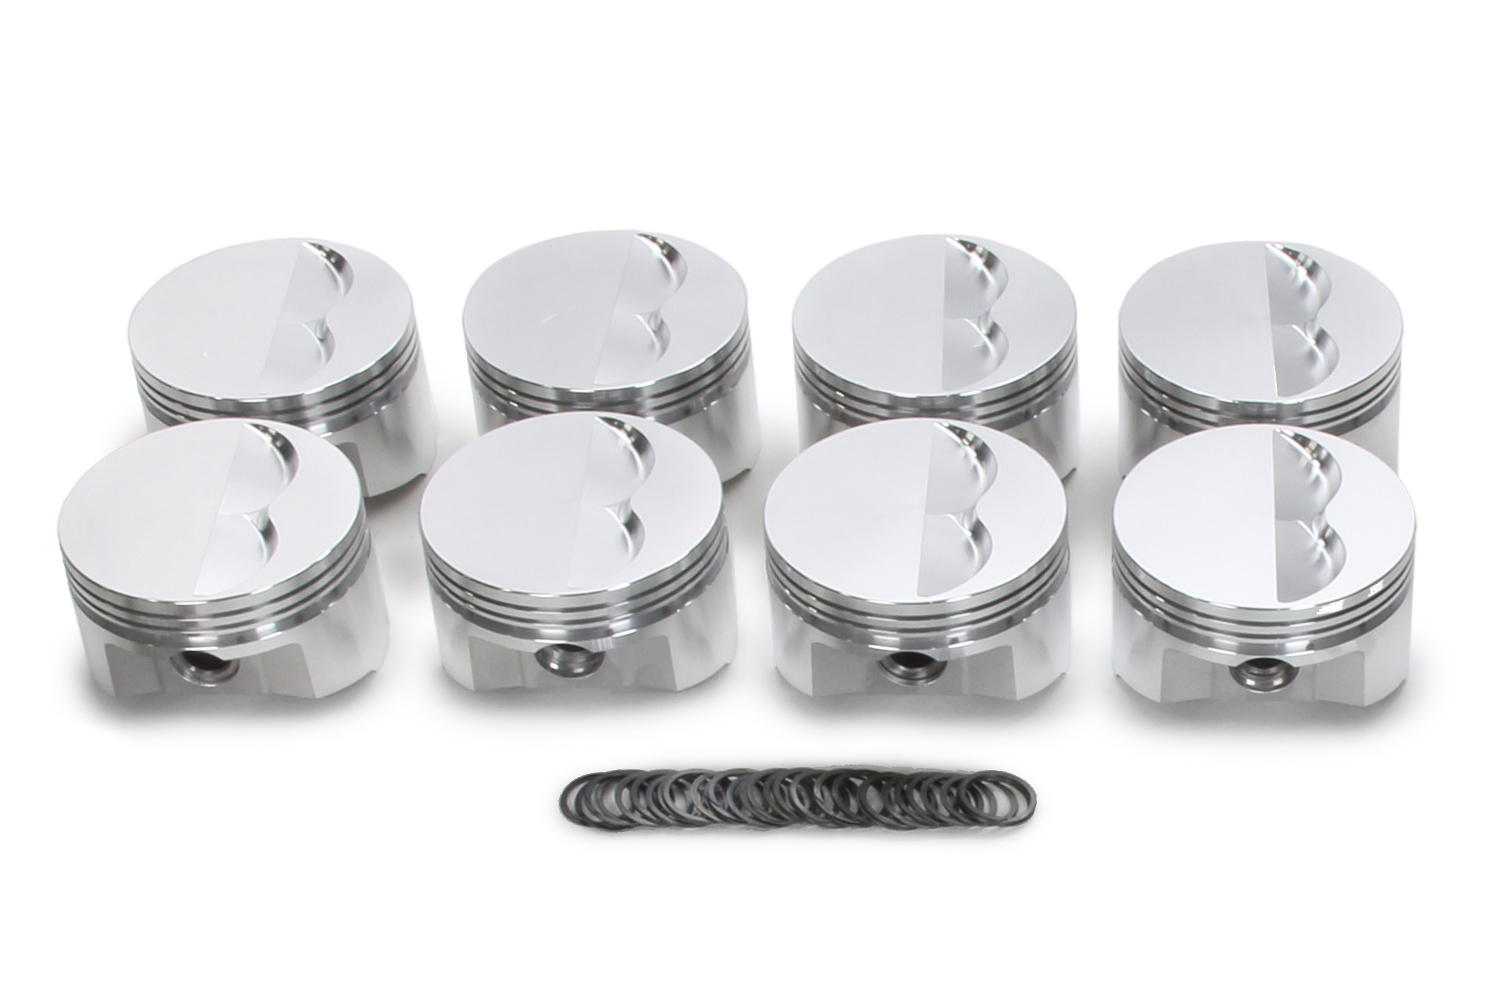 SRP Pistons 138081 Piston, 350 Flat Top, Forged, 4.030 in Bore, 1/16 x 1/16 x 3/16 in Ring Grooves, Minus 5.00 cc, Small Block Chevy, Set of 8